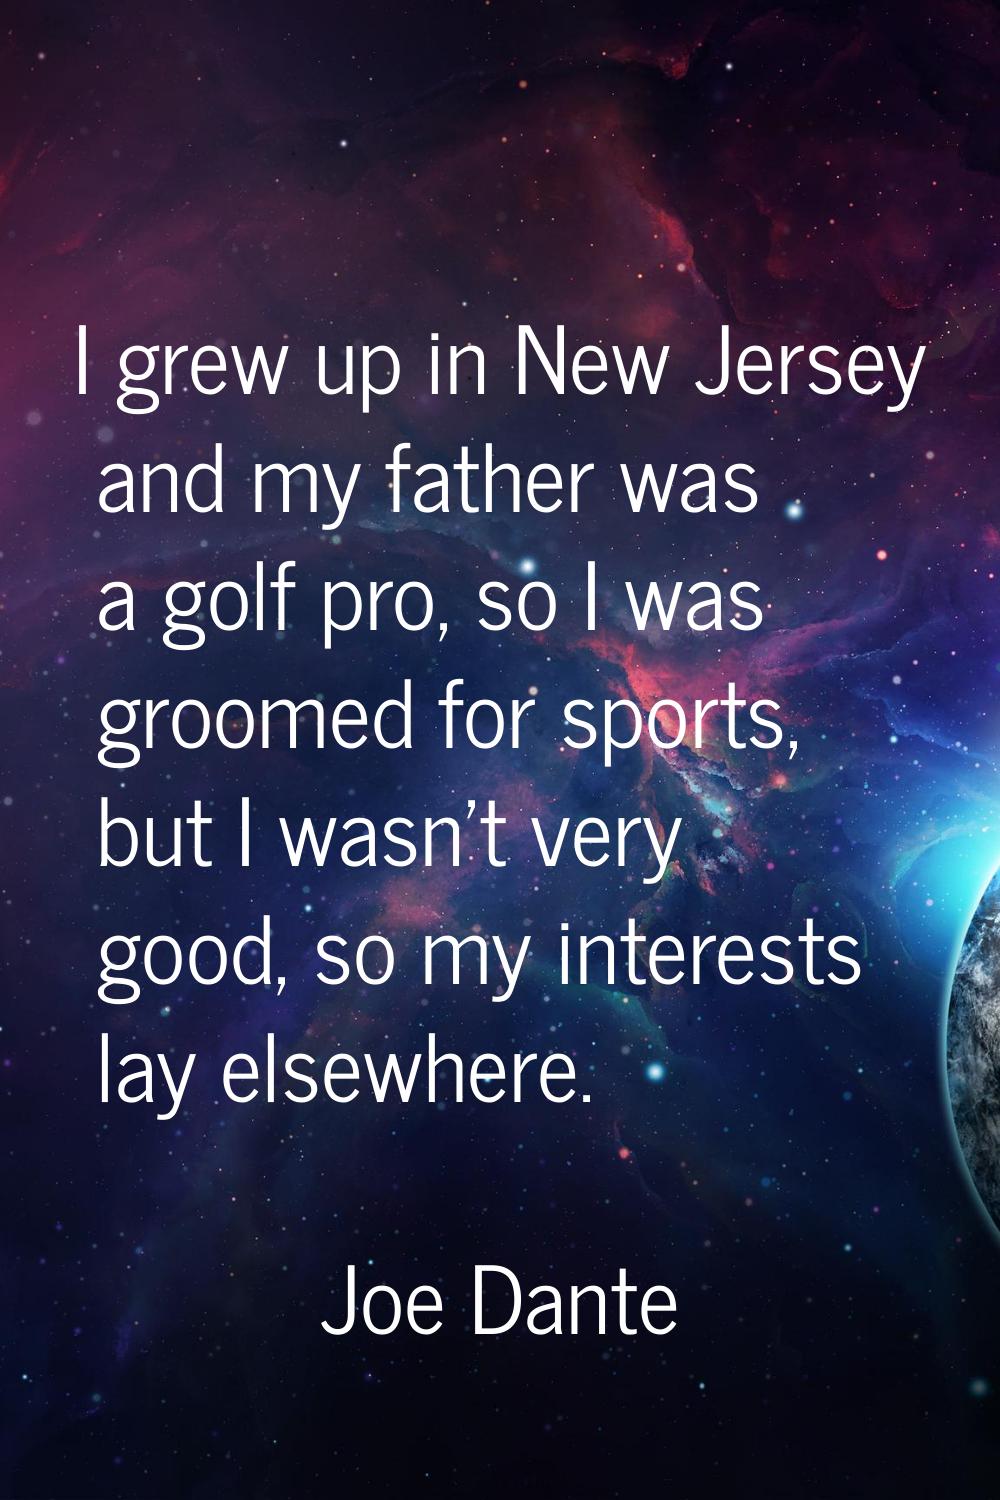 I grew up in New Jersey and my father was a golf pro, so I was groomed for sports, but I wasn't ver